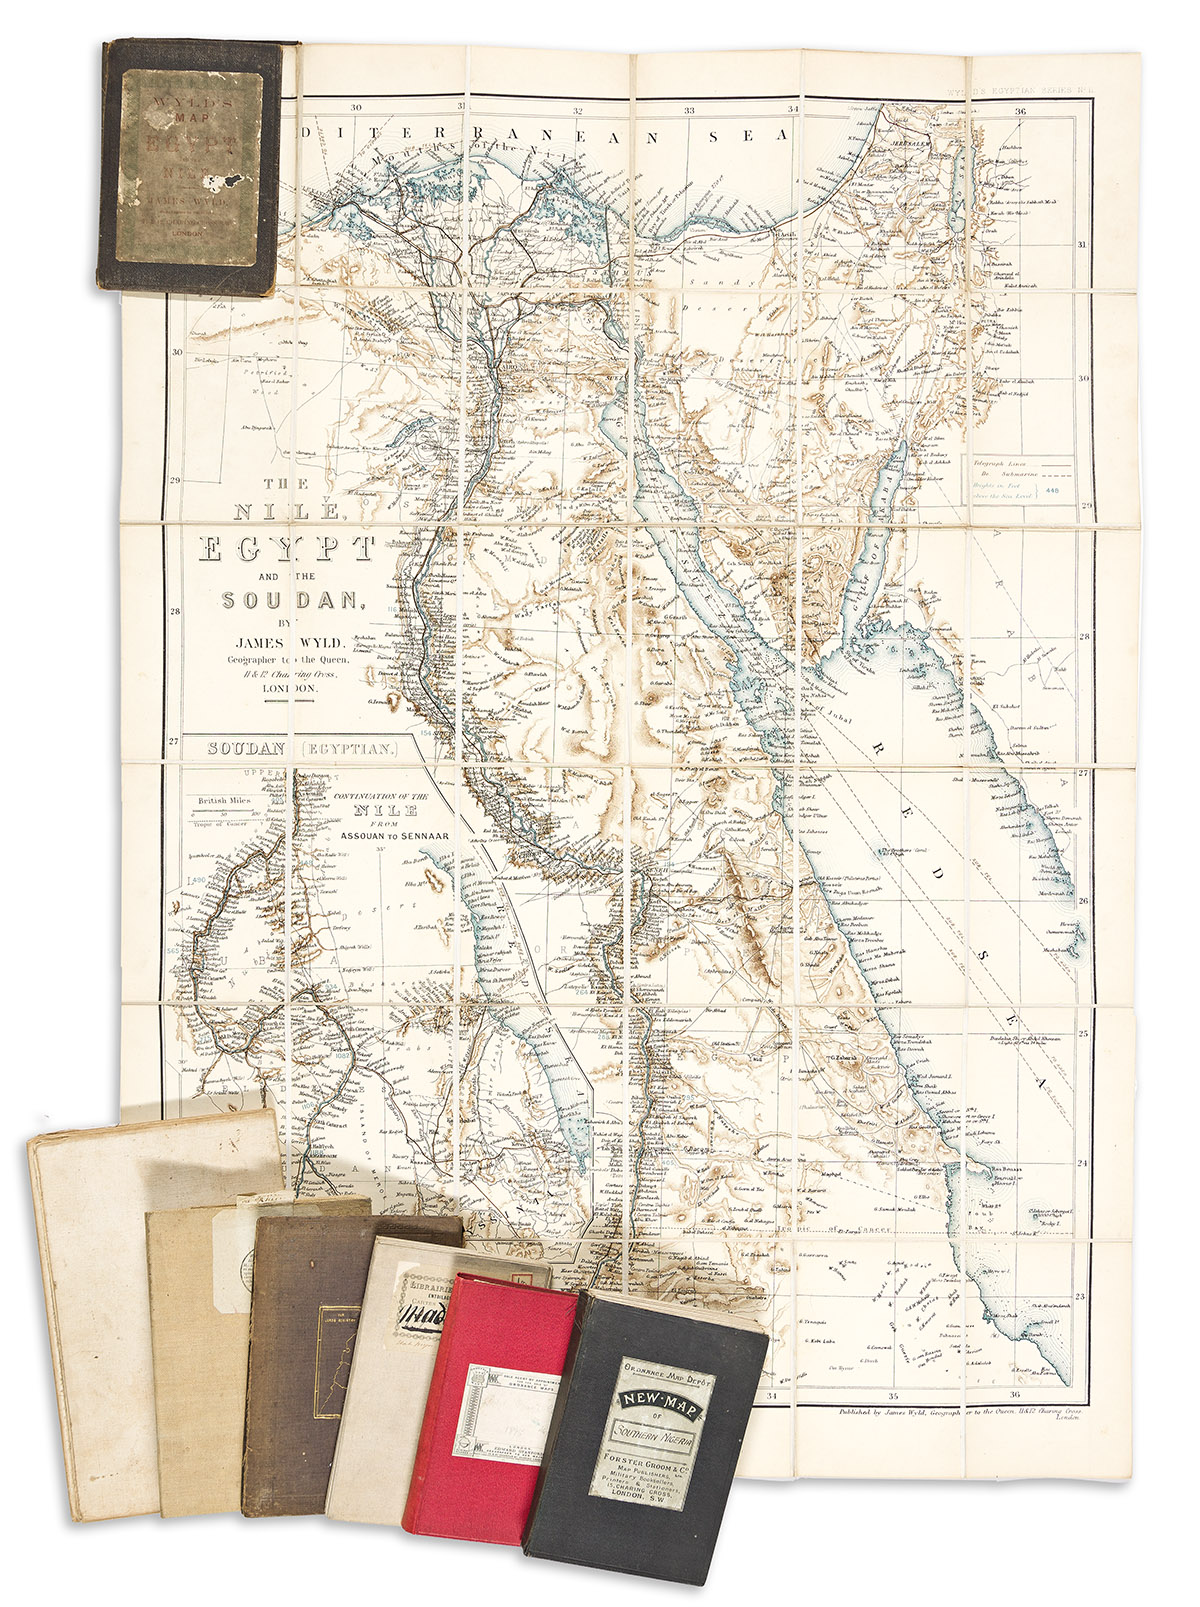 (CASE MAPS.) Group of 14 seventeenth-through-nineteenth-century engraved or lithographed case maps of various locations.